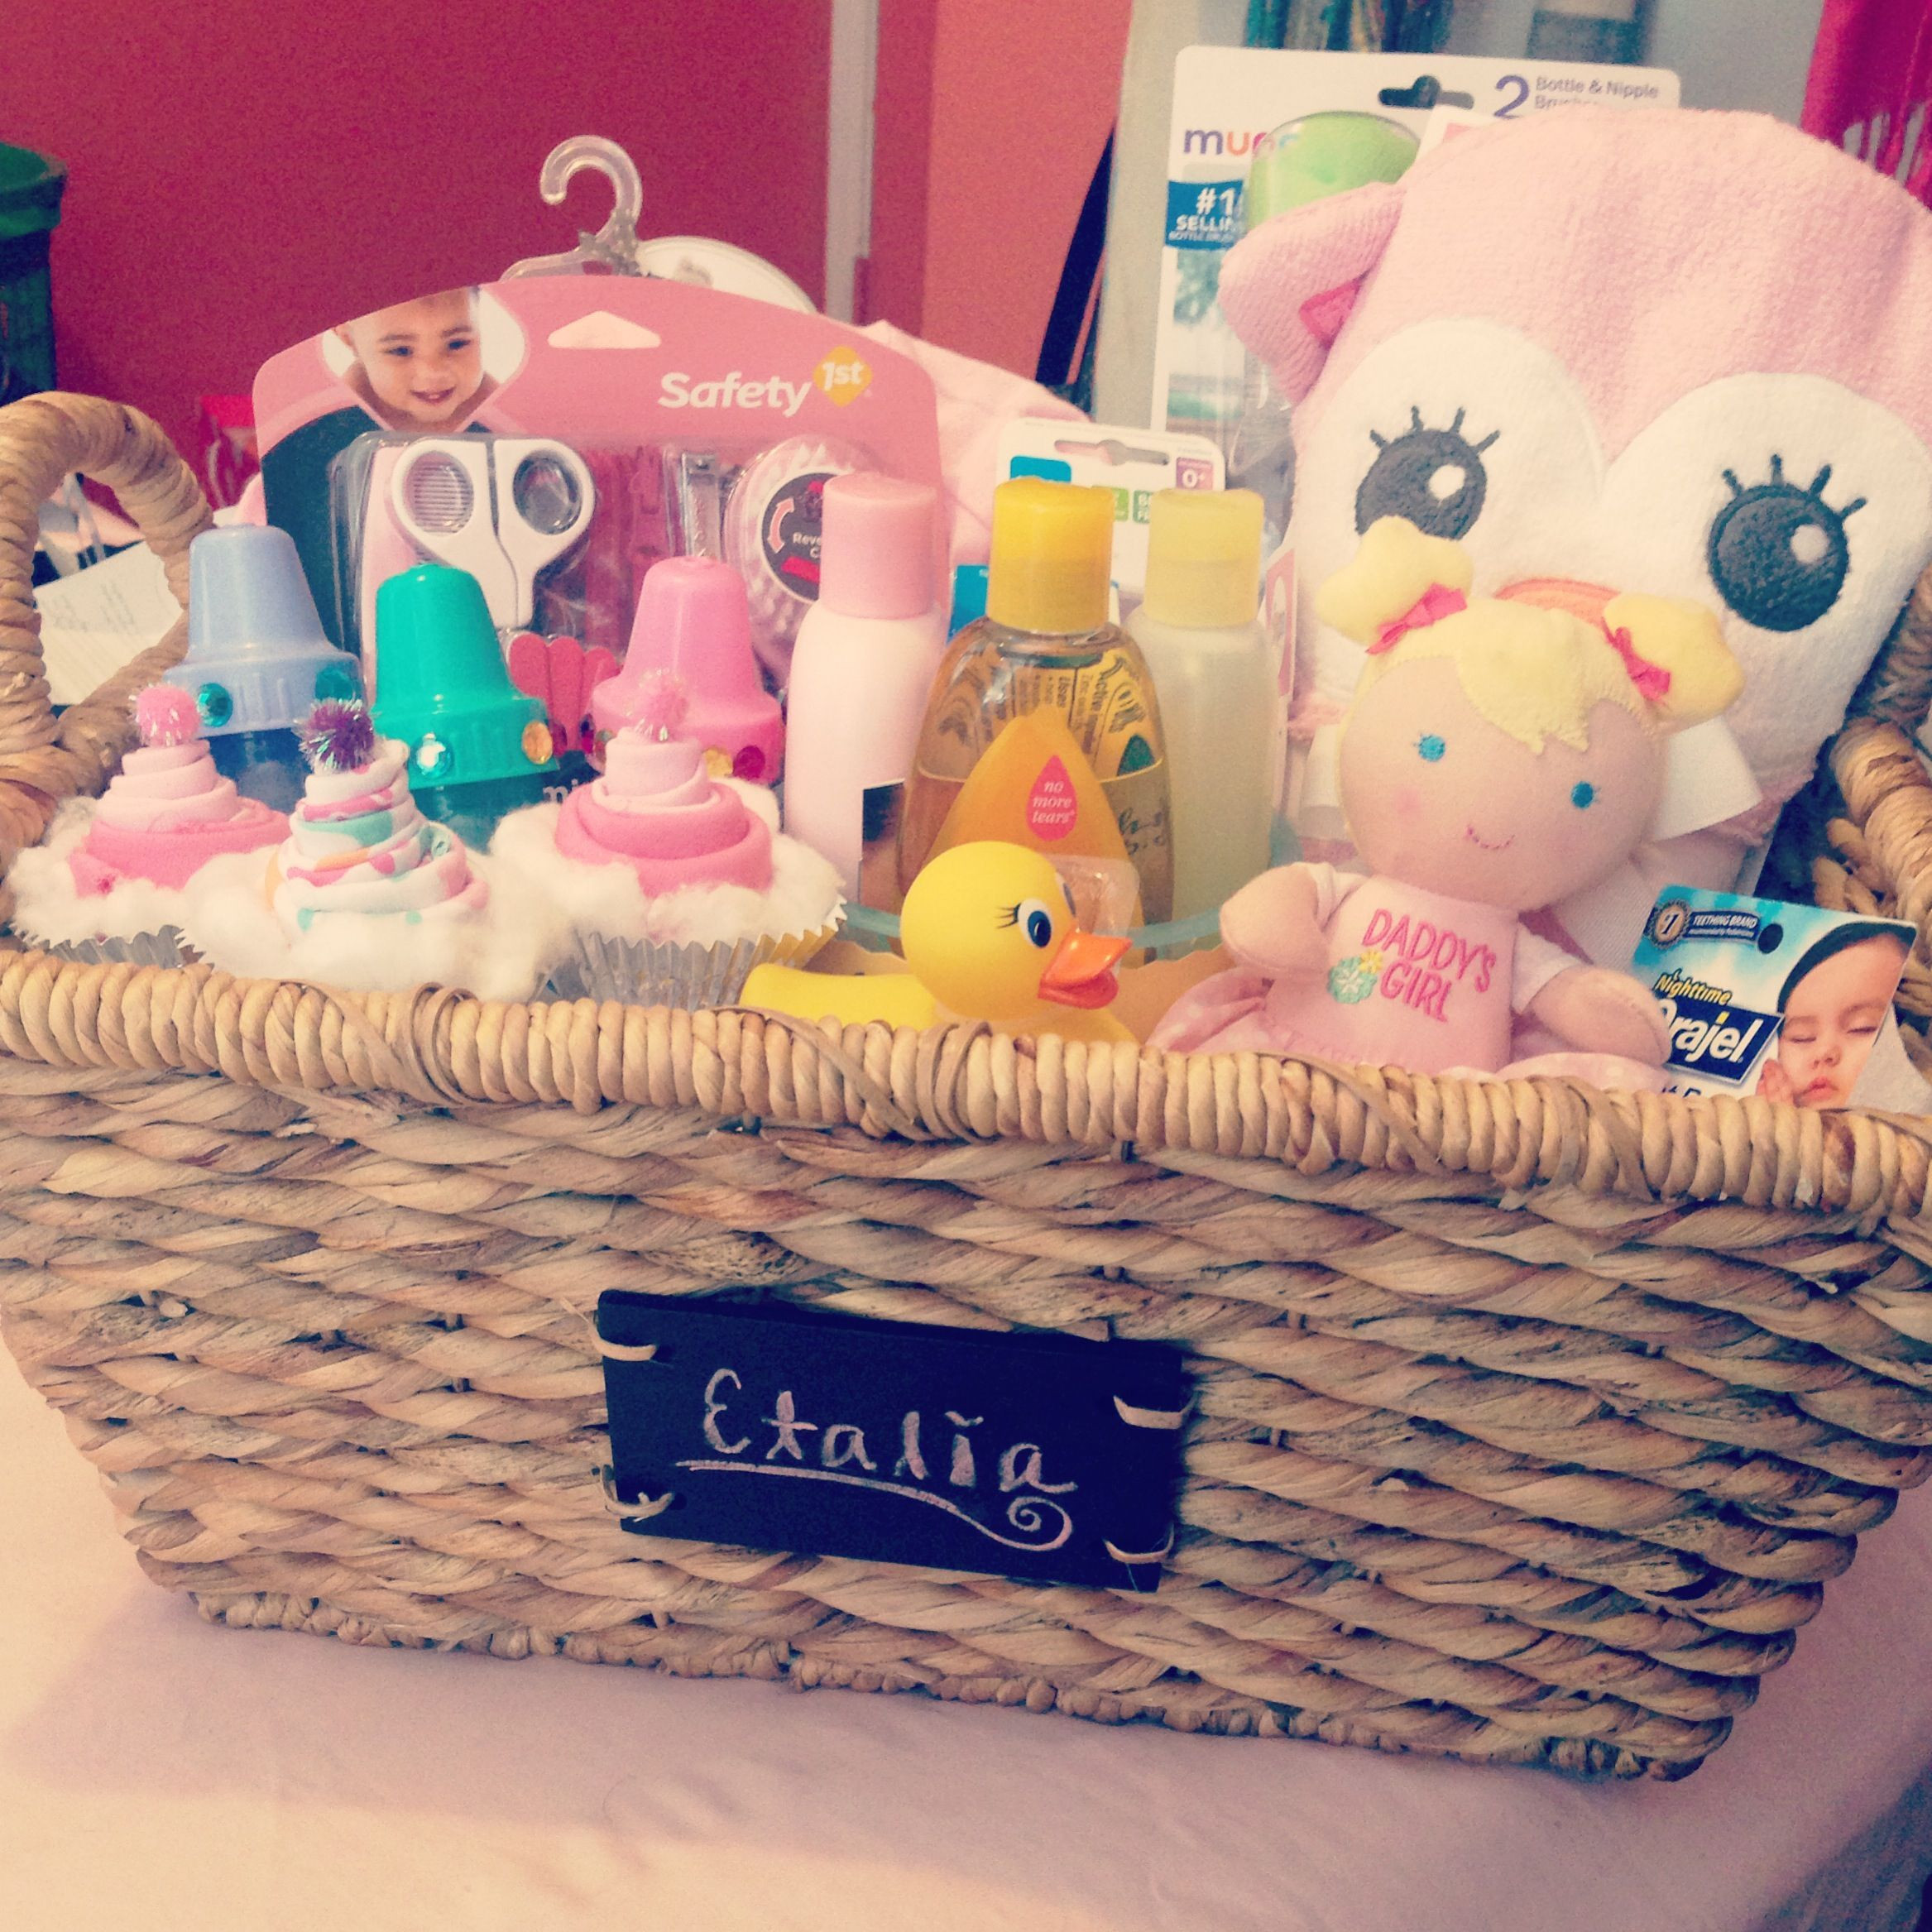 Baby Shower Basket Gift Ideas
 Baby shower basket t idea for girl baby tbaskets